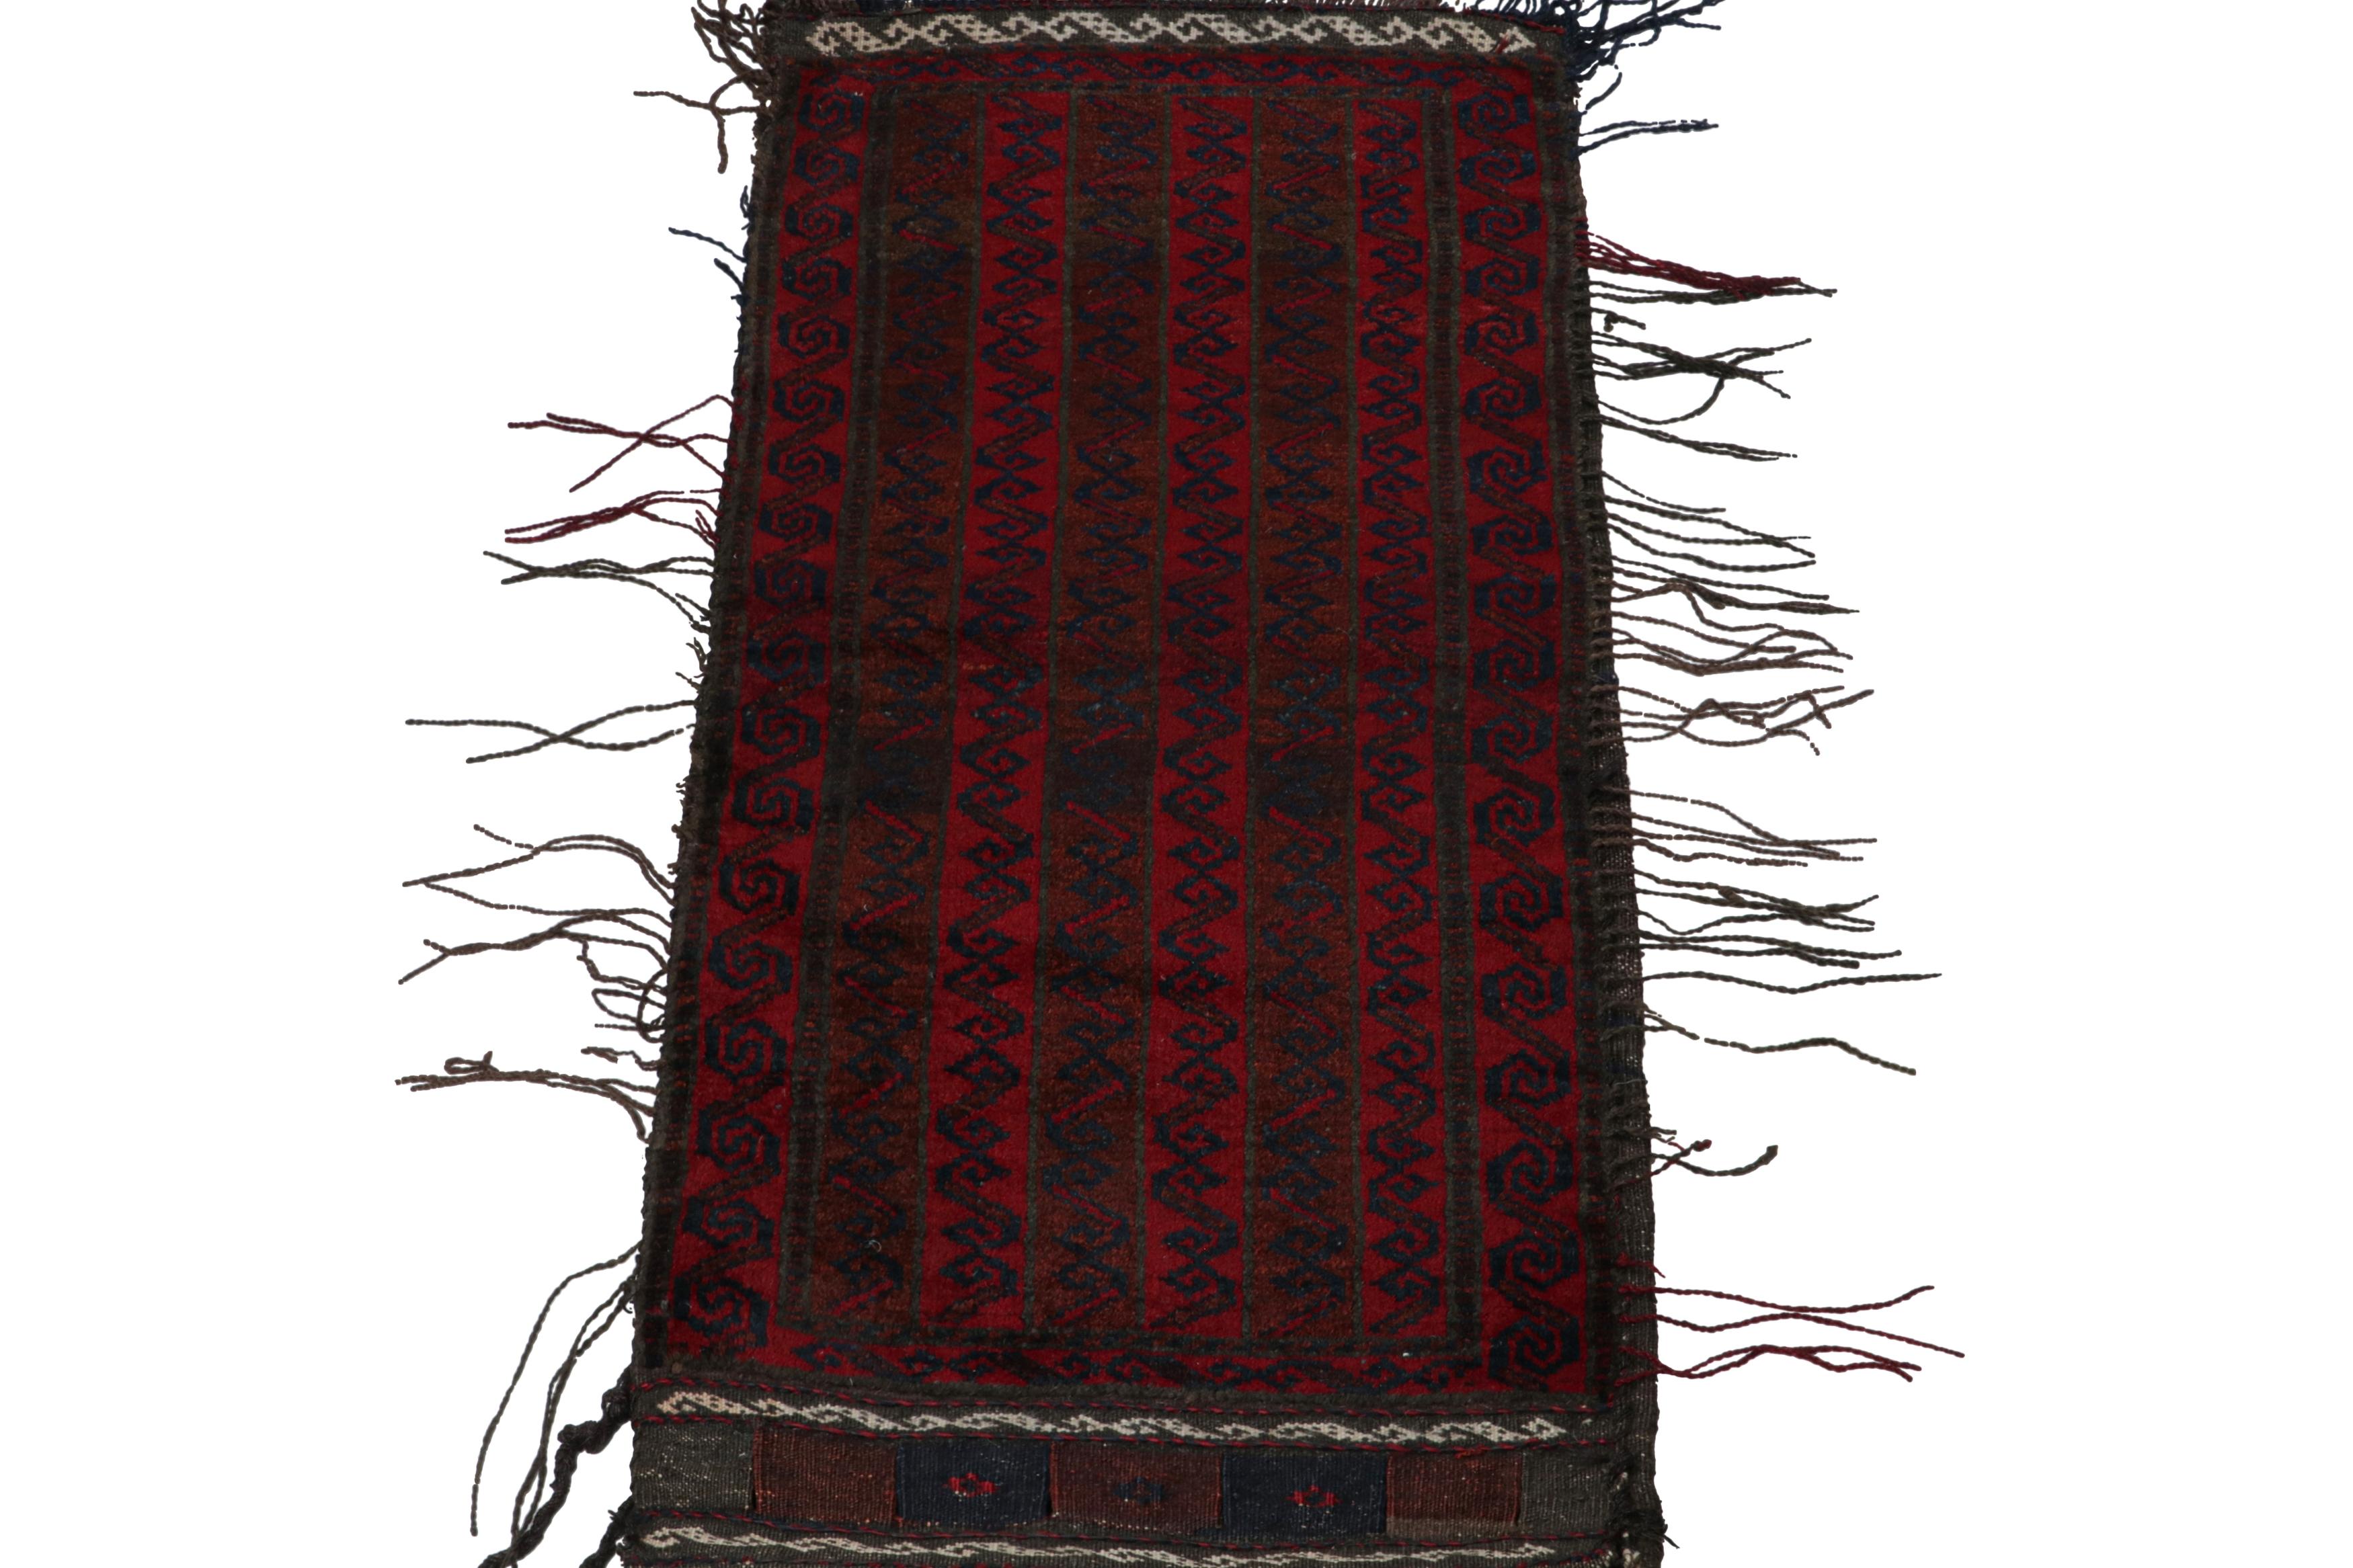 Tribal Vintage Baluch Persian rug in Brown, Red & Blue Patterns from Rug & Kilim For Sale